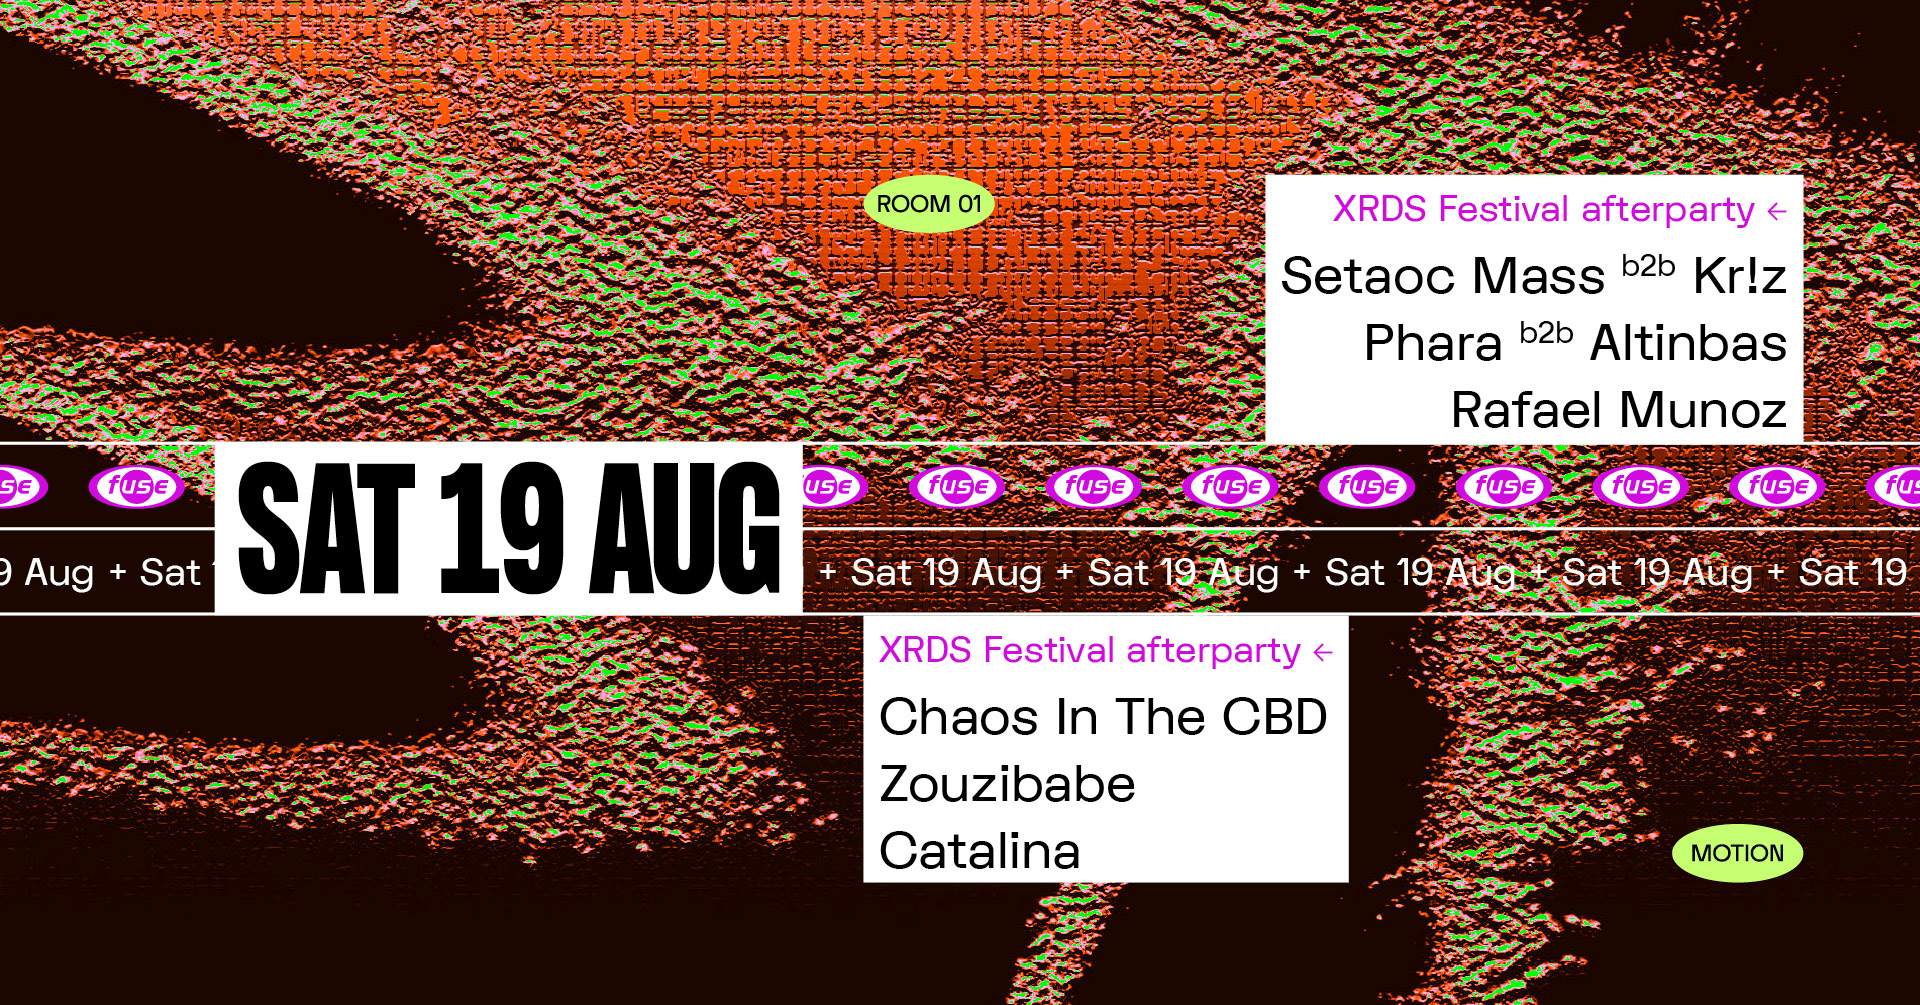 Fuse presents: XRDS afterparty with Setaoc Mass b2b Kr!z & Chaos In The CBD - Página frontal